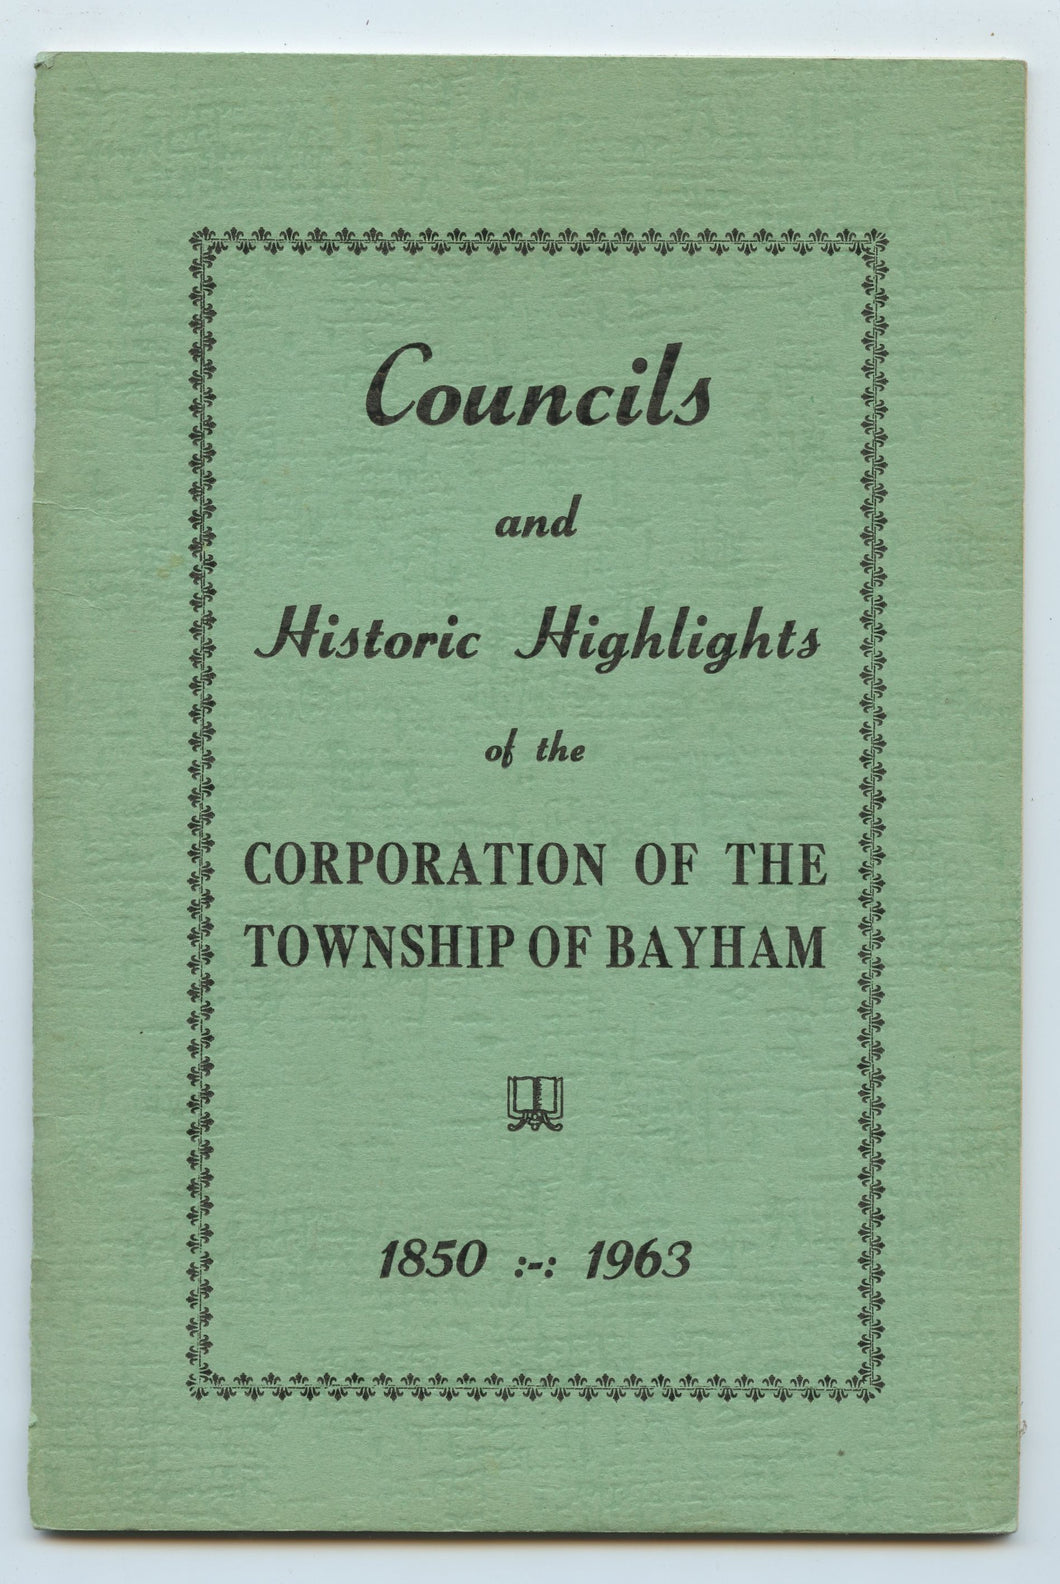 Councils and Historic Highlights of the Corporation of the Township of Bayham 1850-1963